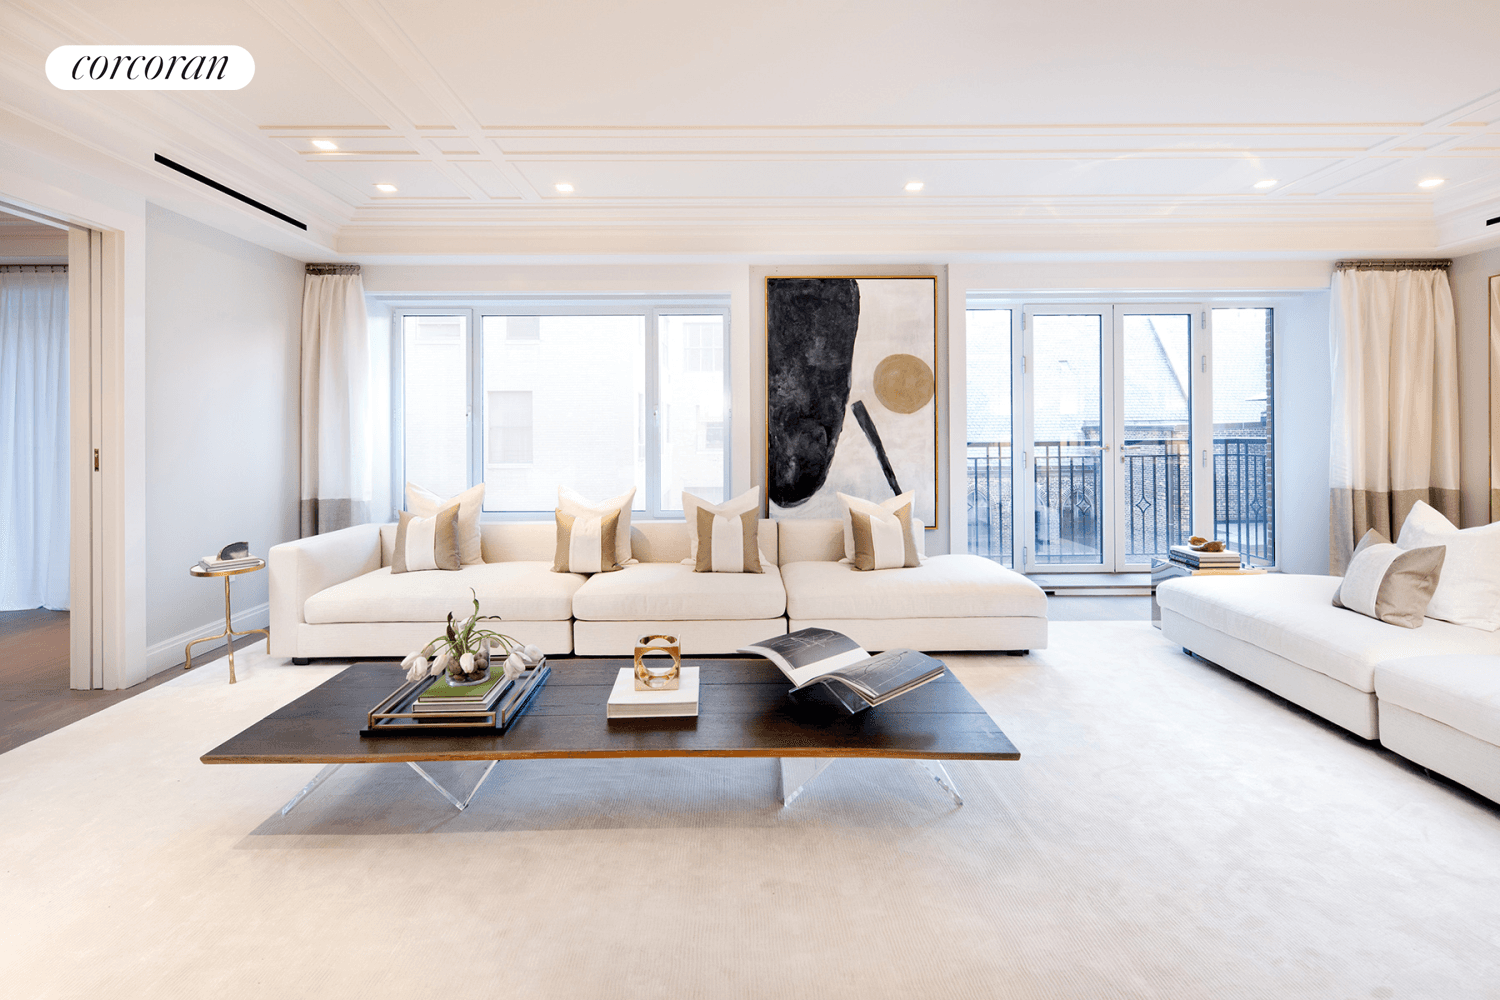 Extraordinary features come together in this sun filled, luxury Penthouse triplex condominium with private keyed elevator entry on the Upper East Side's 'Gold Coast'.